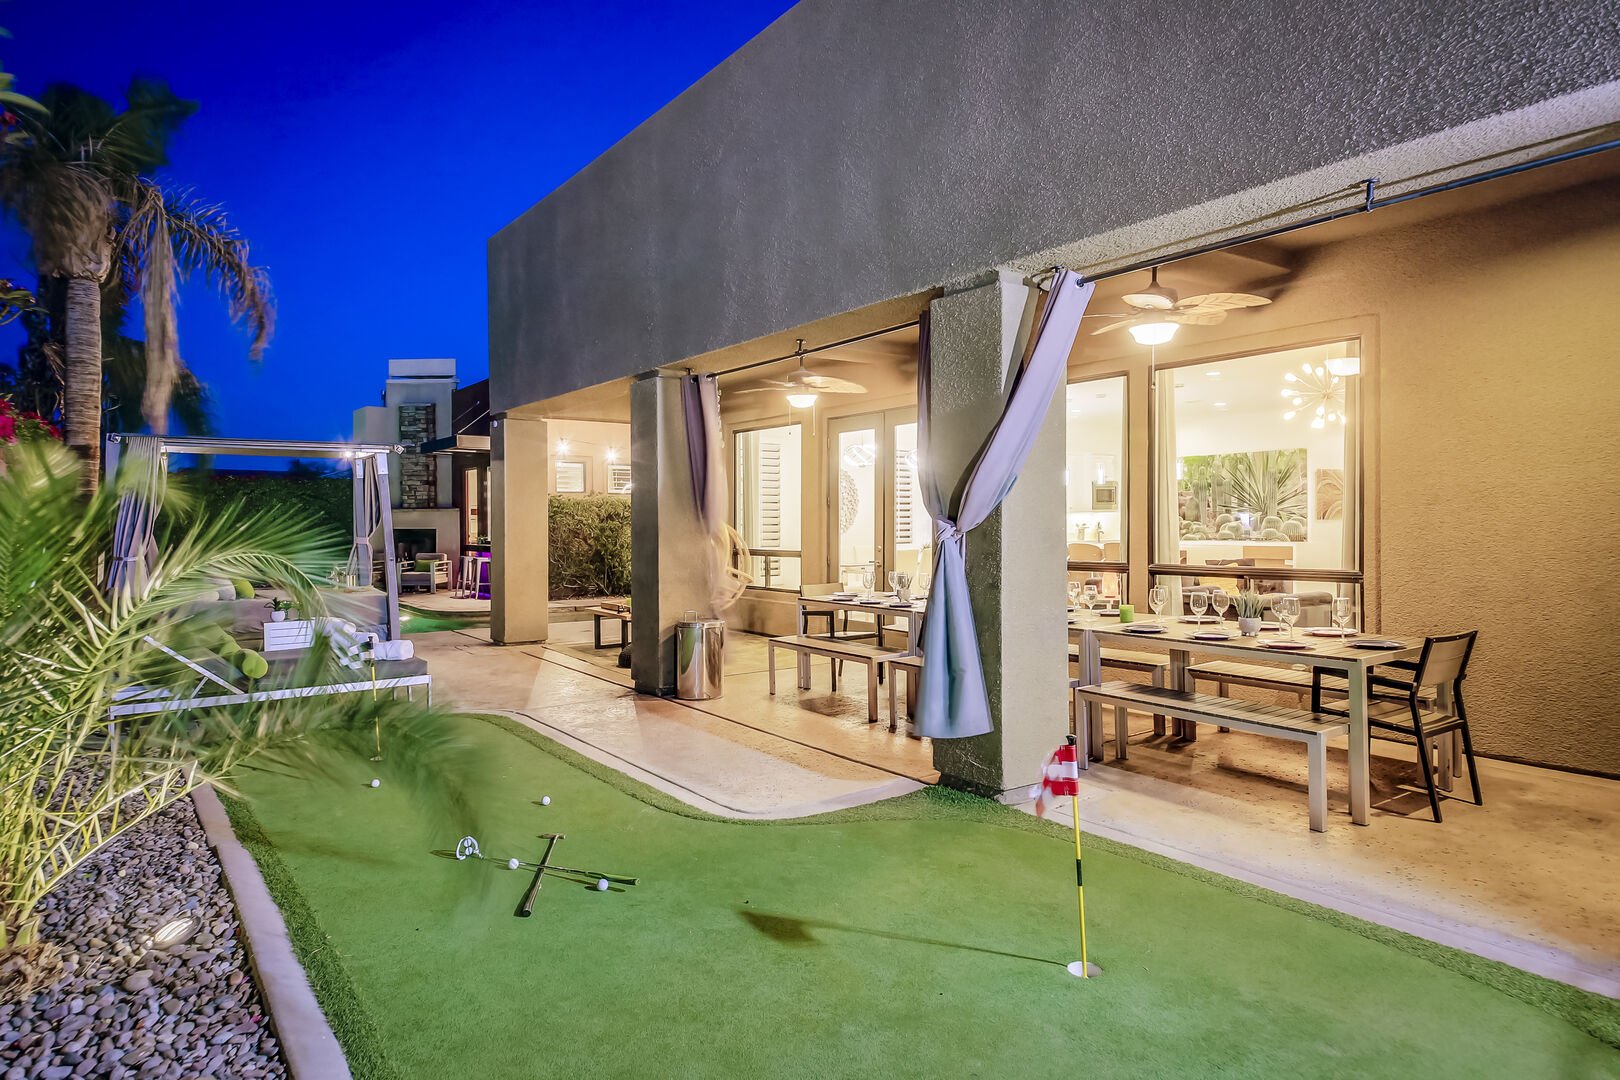 After dinner head over to the putting green to practice your game of golf.